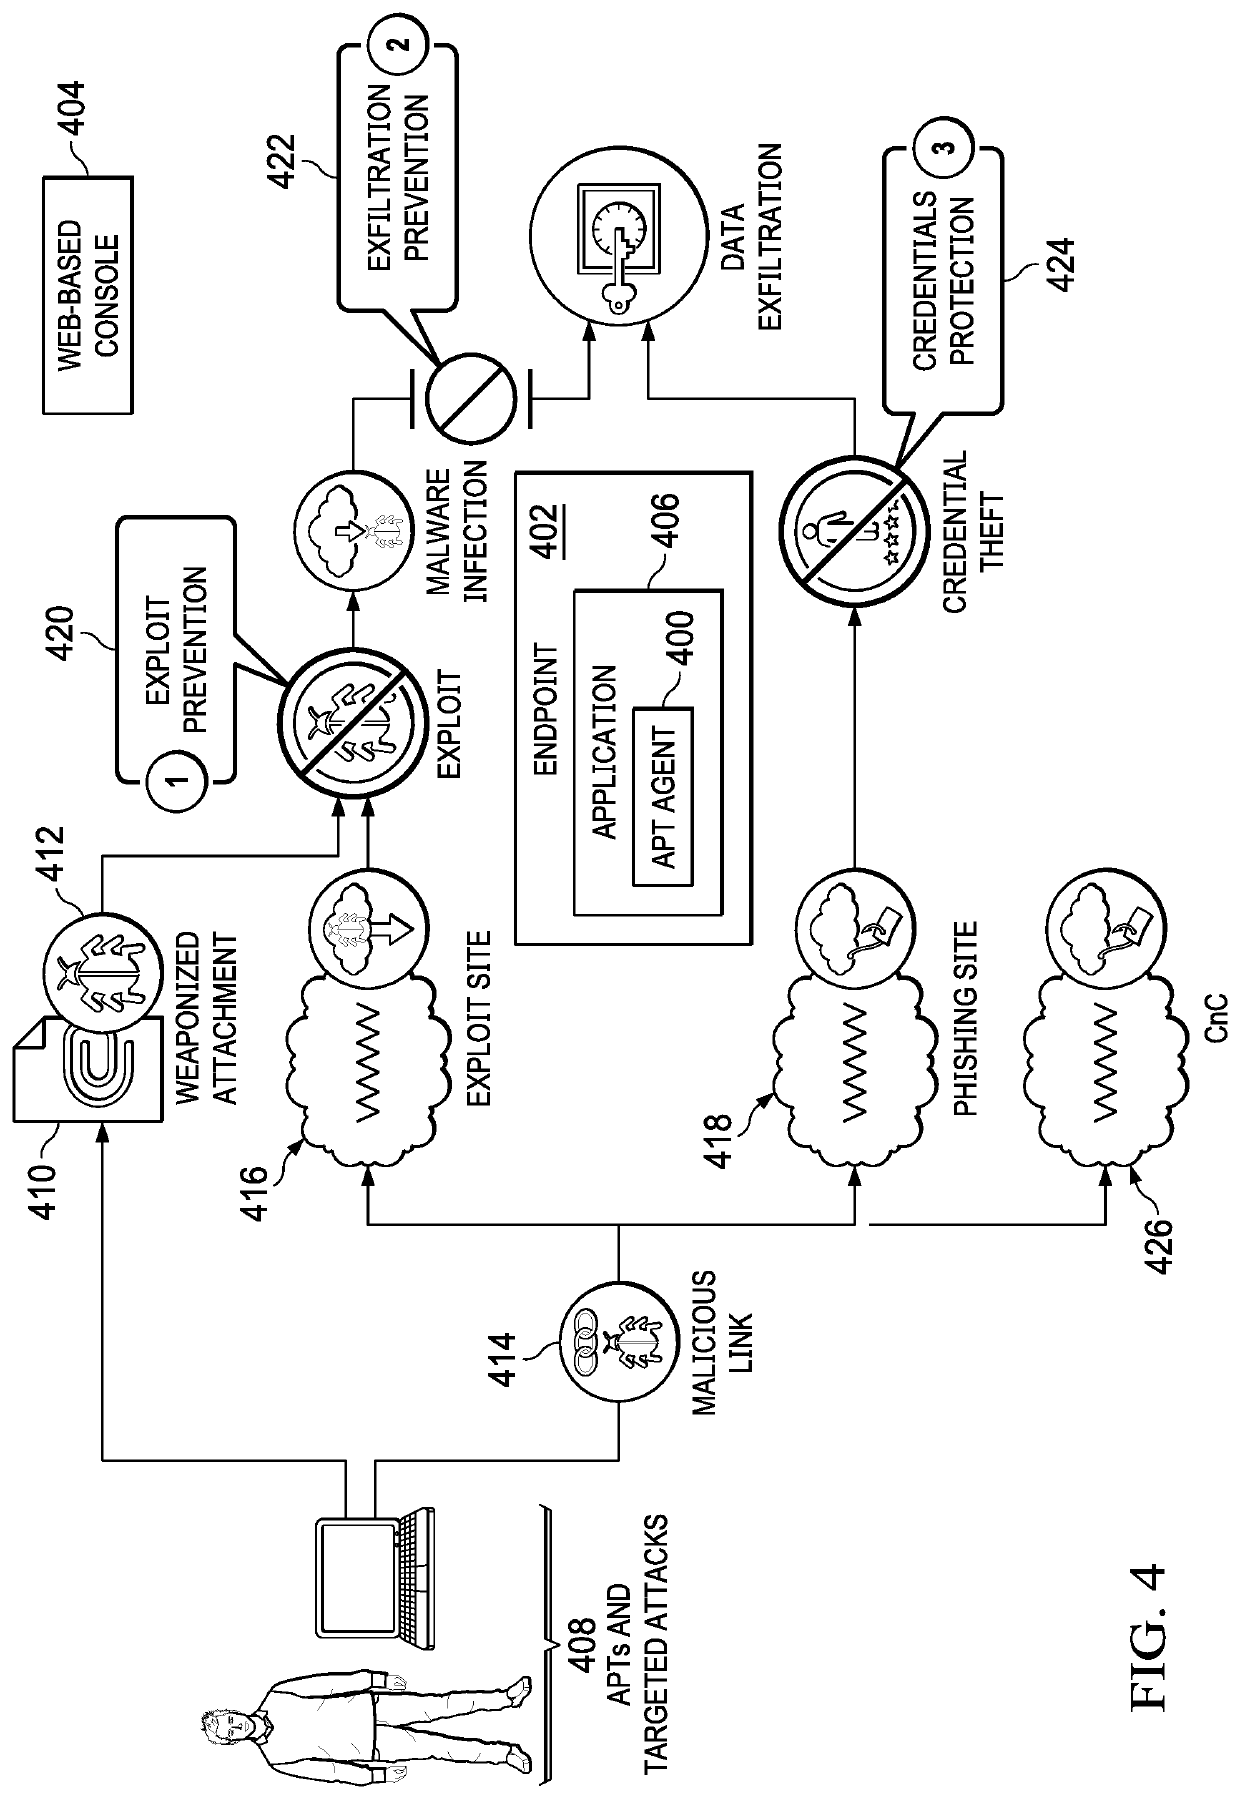 Automated semantic modeling of system events